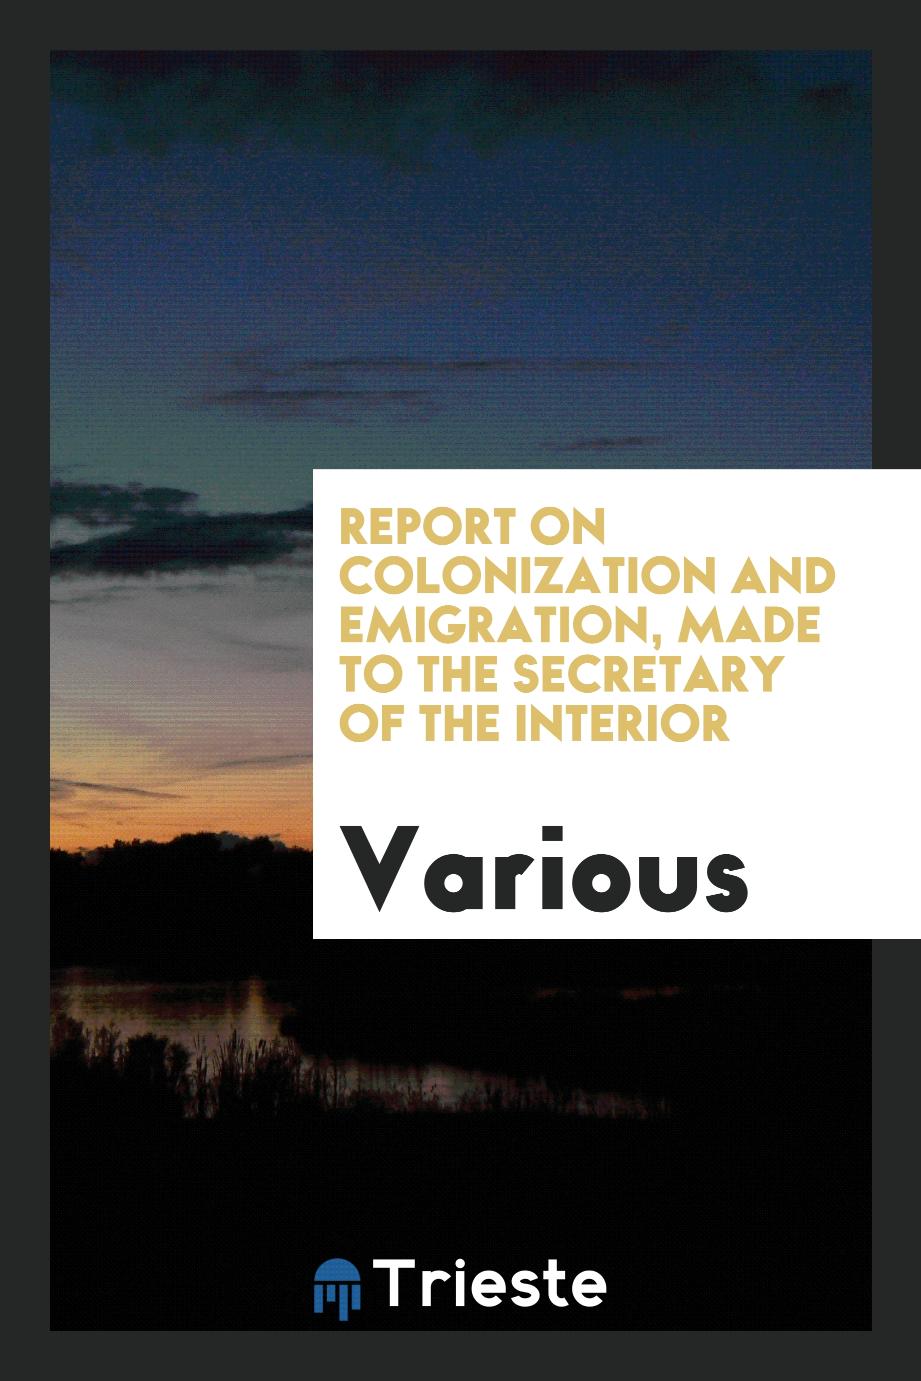 Report on colonization and emigration, made to the secretary of the interior